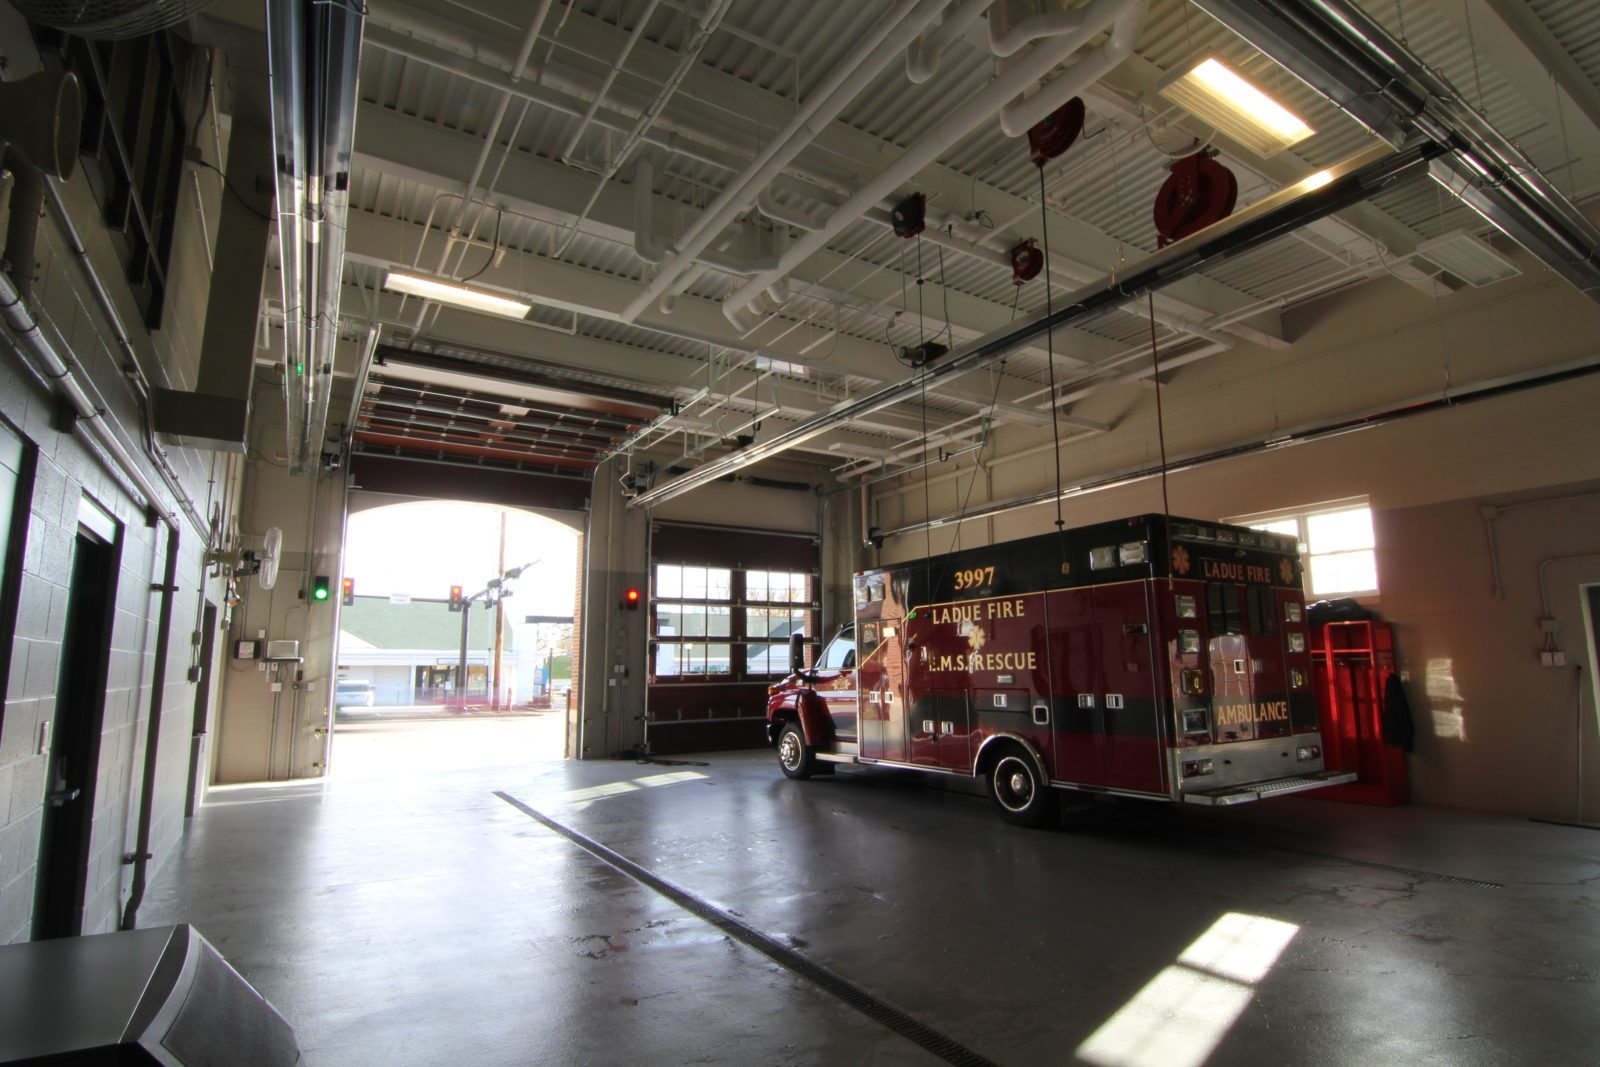 City of Ladue - Fire Station #2